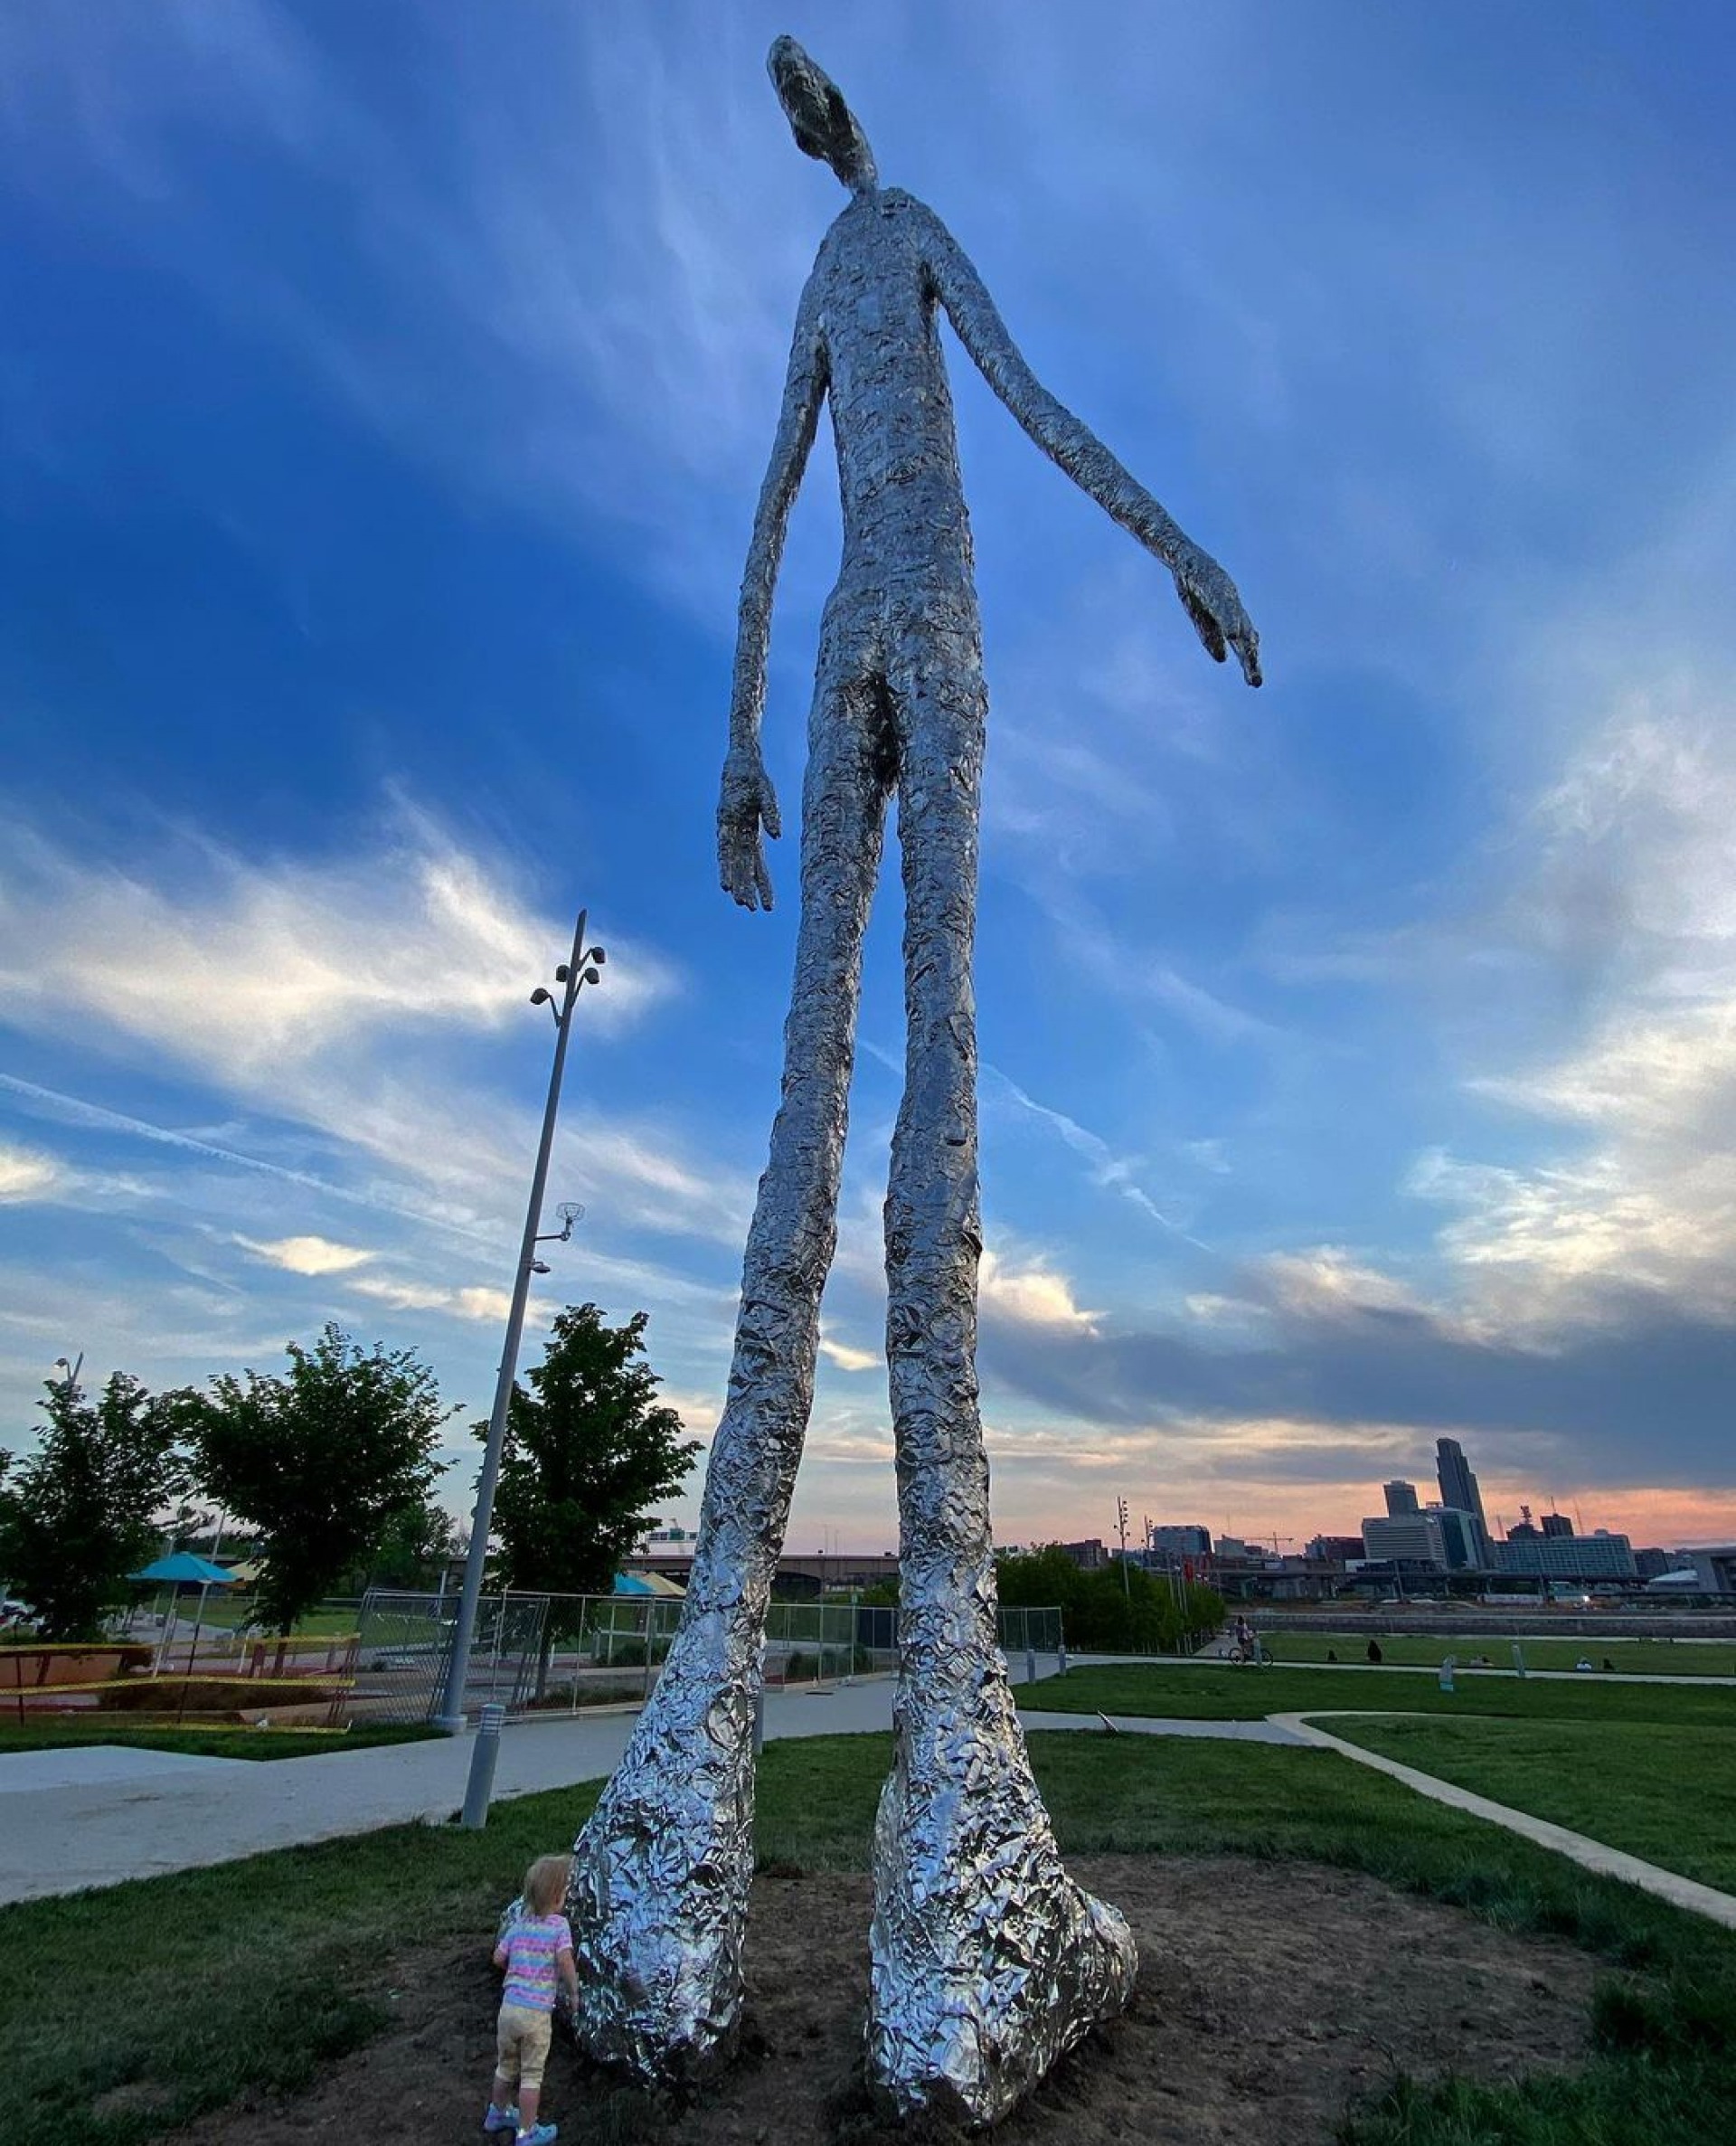 Child standing next to the Looking Up statue in Council Bluffs, Iowa